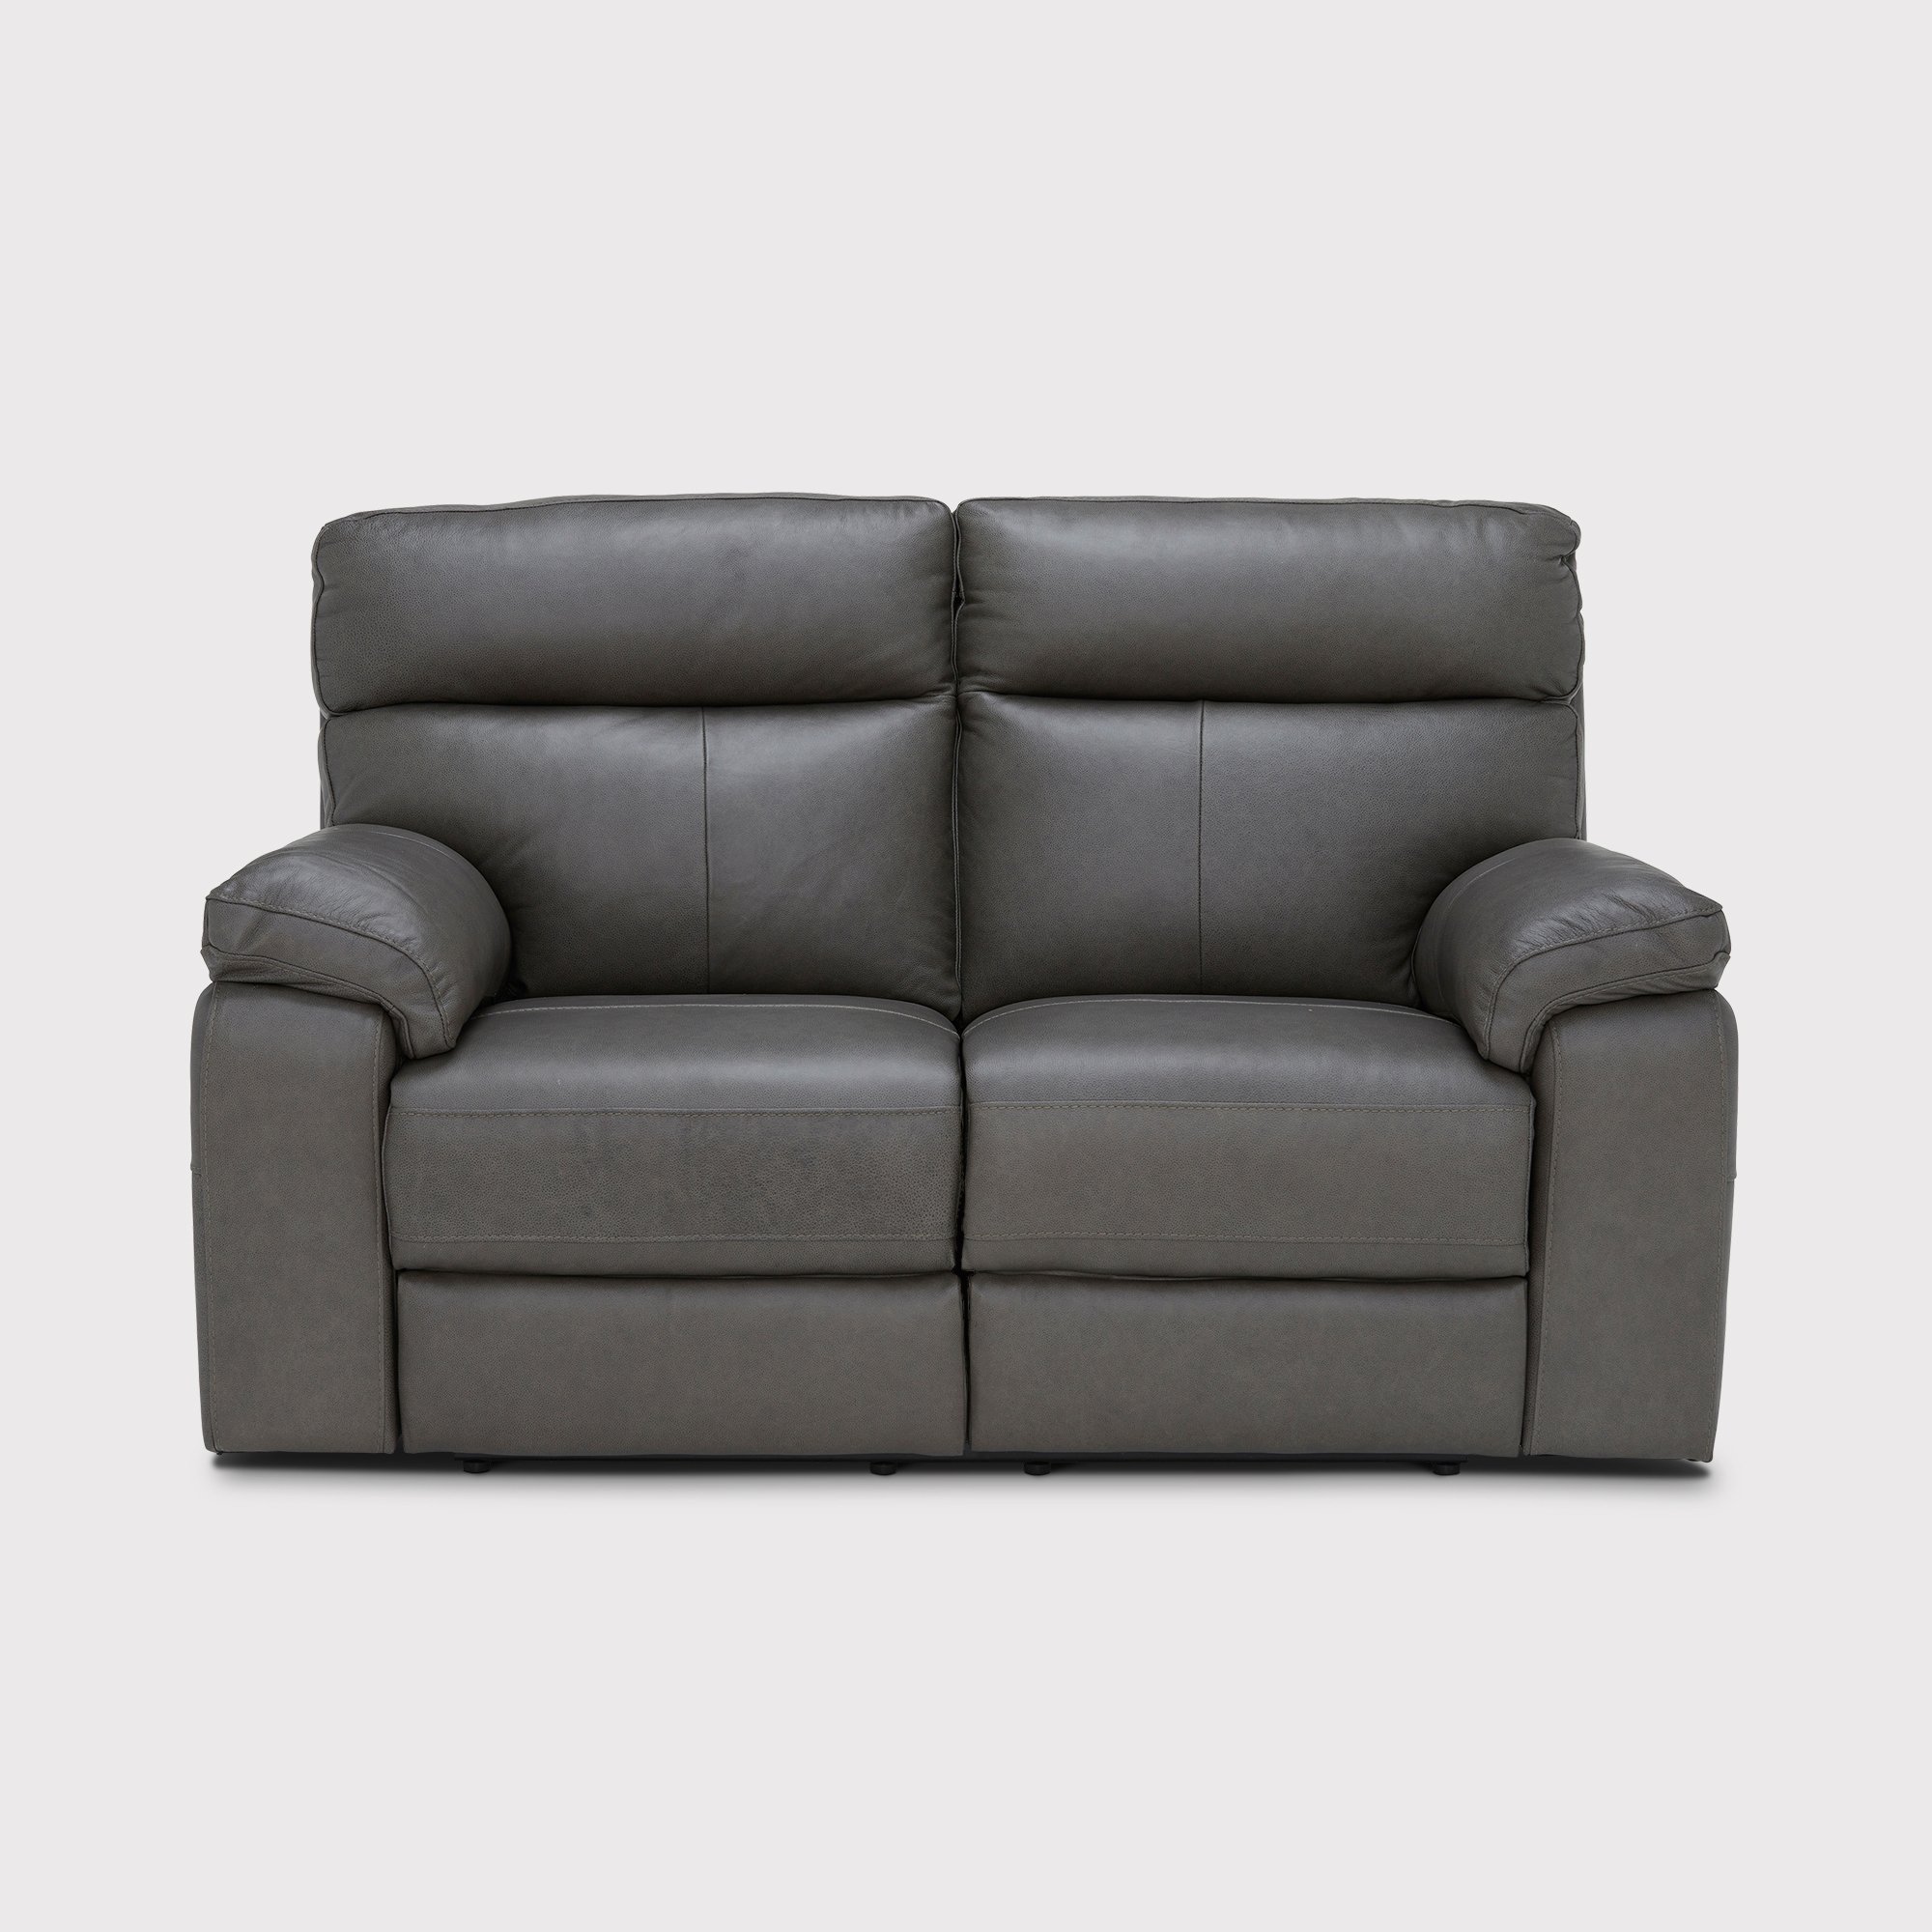 Clark 2 Seater Recliner Sofa With Power Motion Recliner, Grey Leather | Barker & Stonehouse